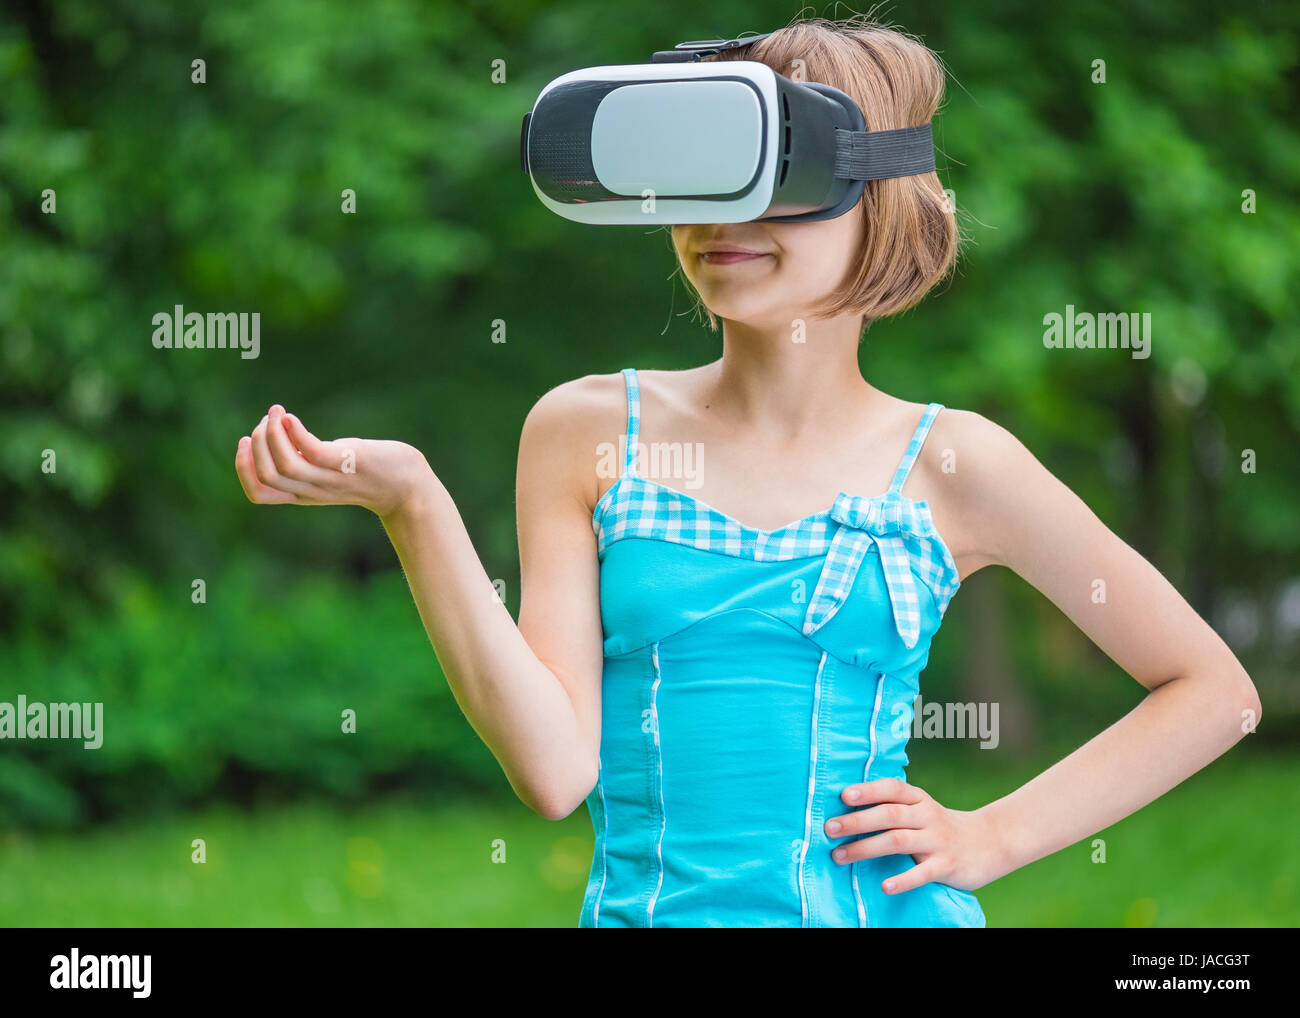 Little girl with VR glasses in park Stock Photo